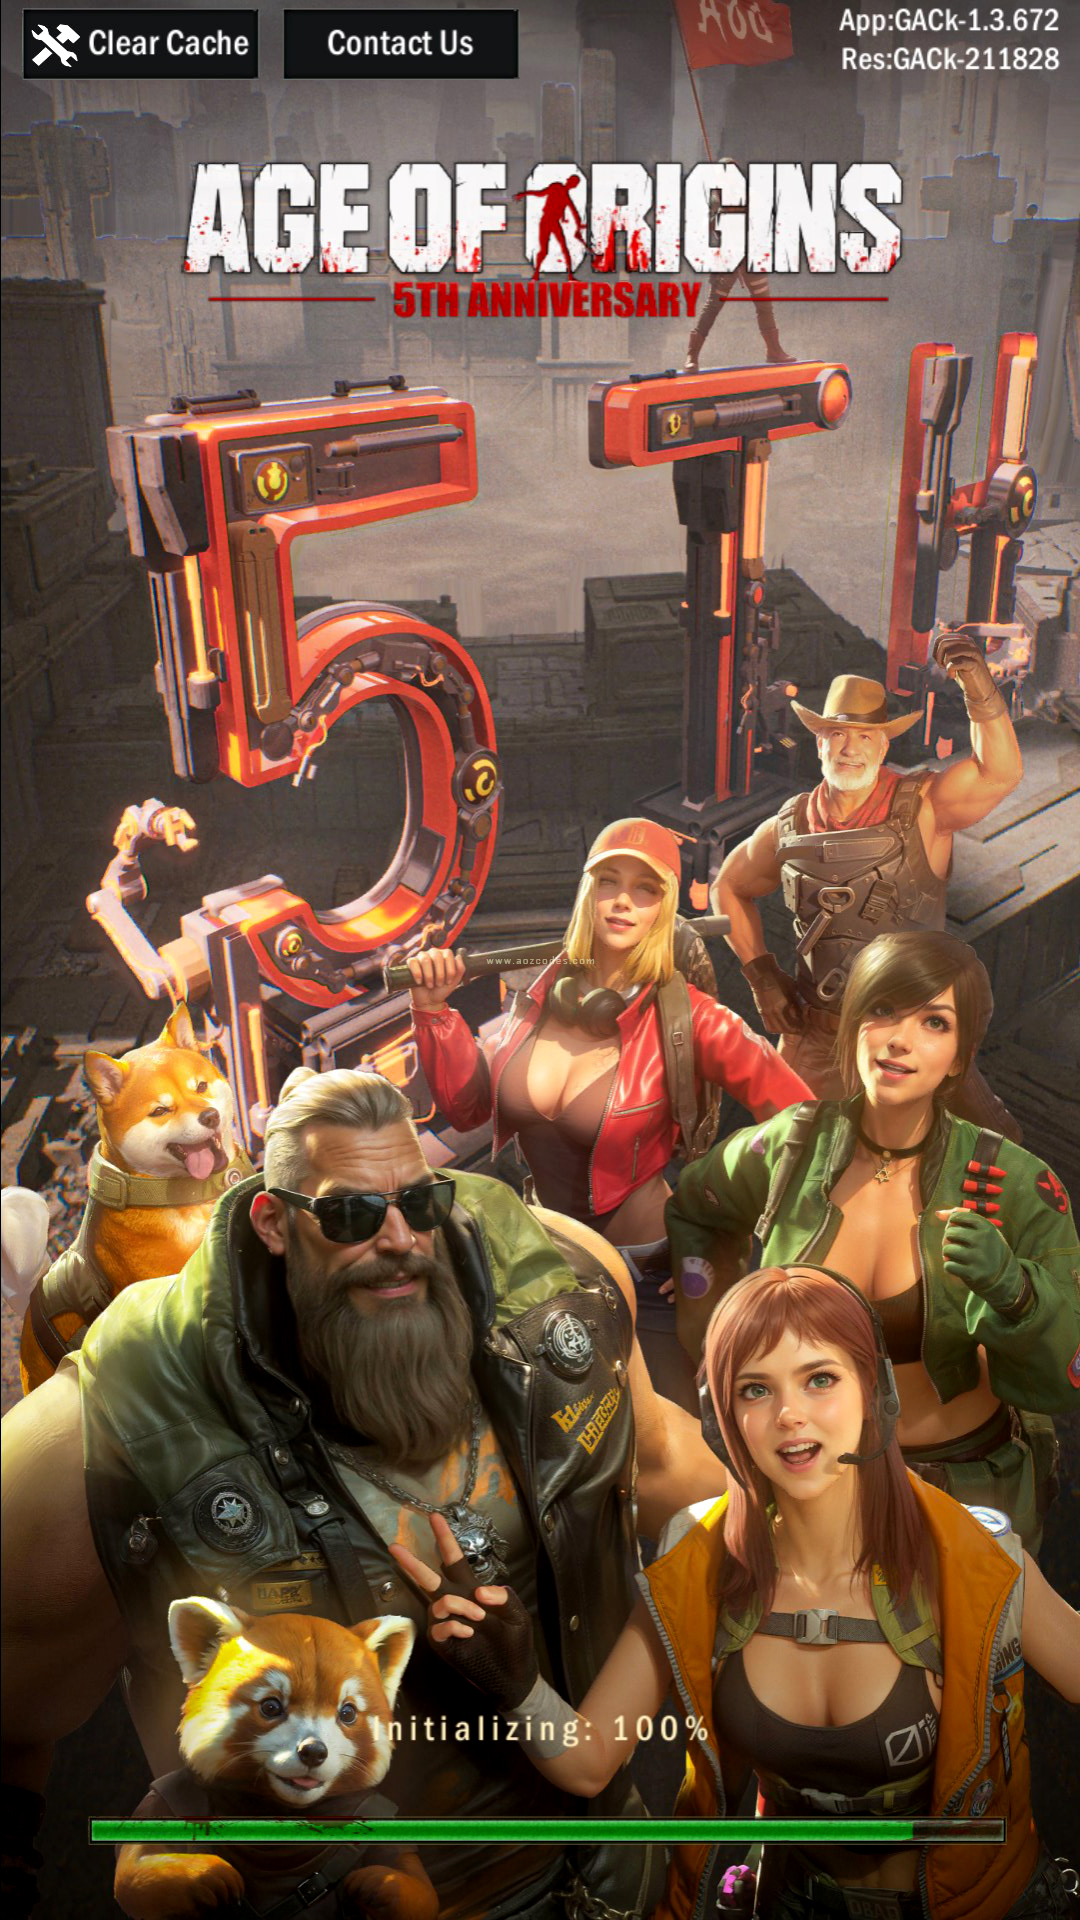 Age Of Origins - Loading screen - Year 5th